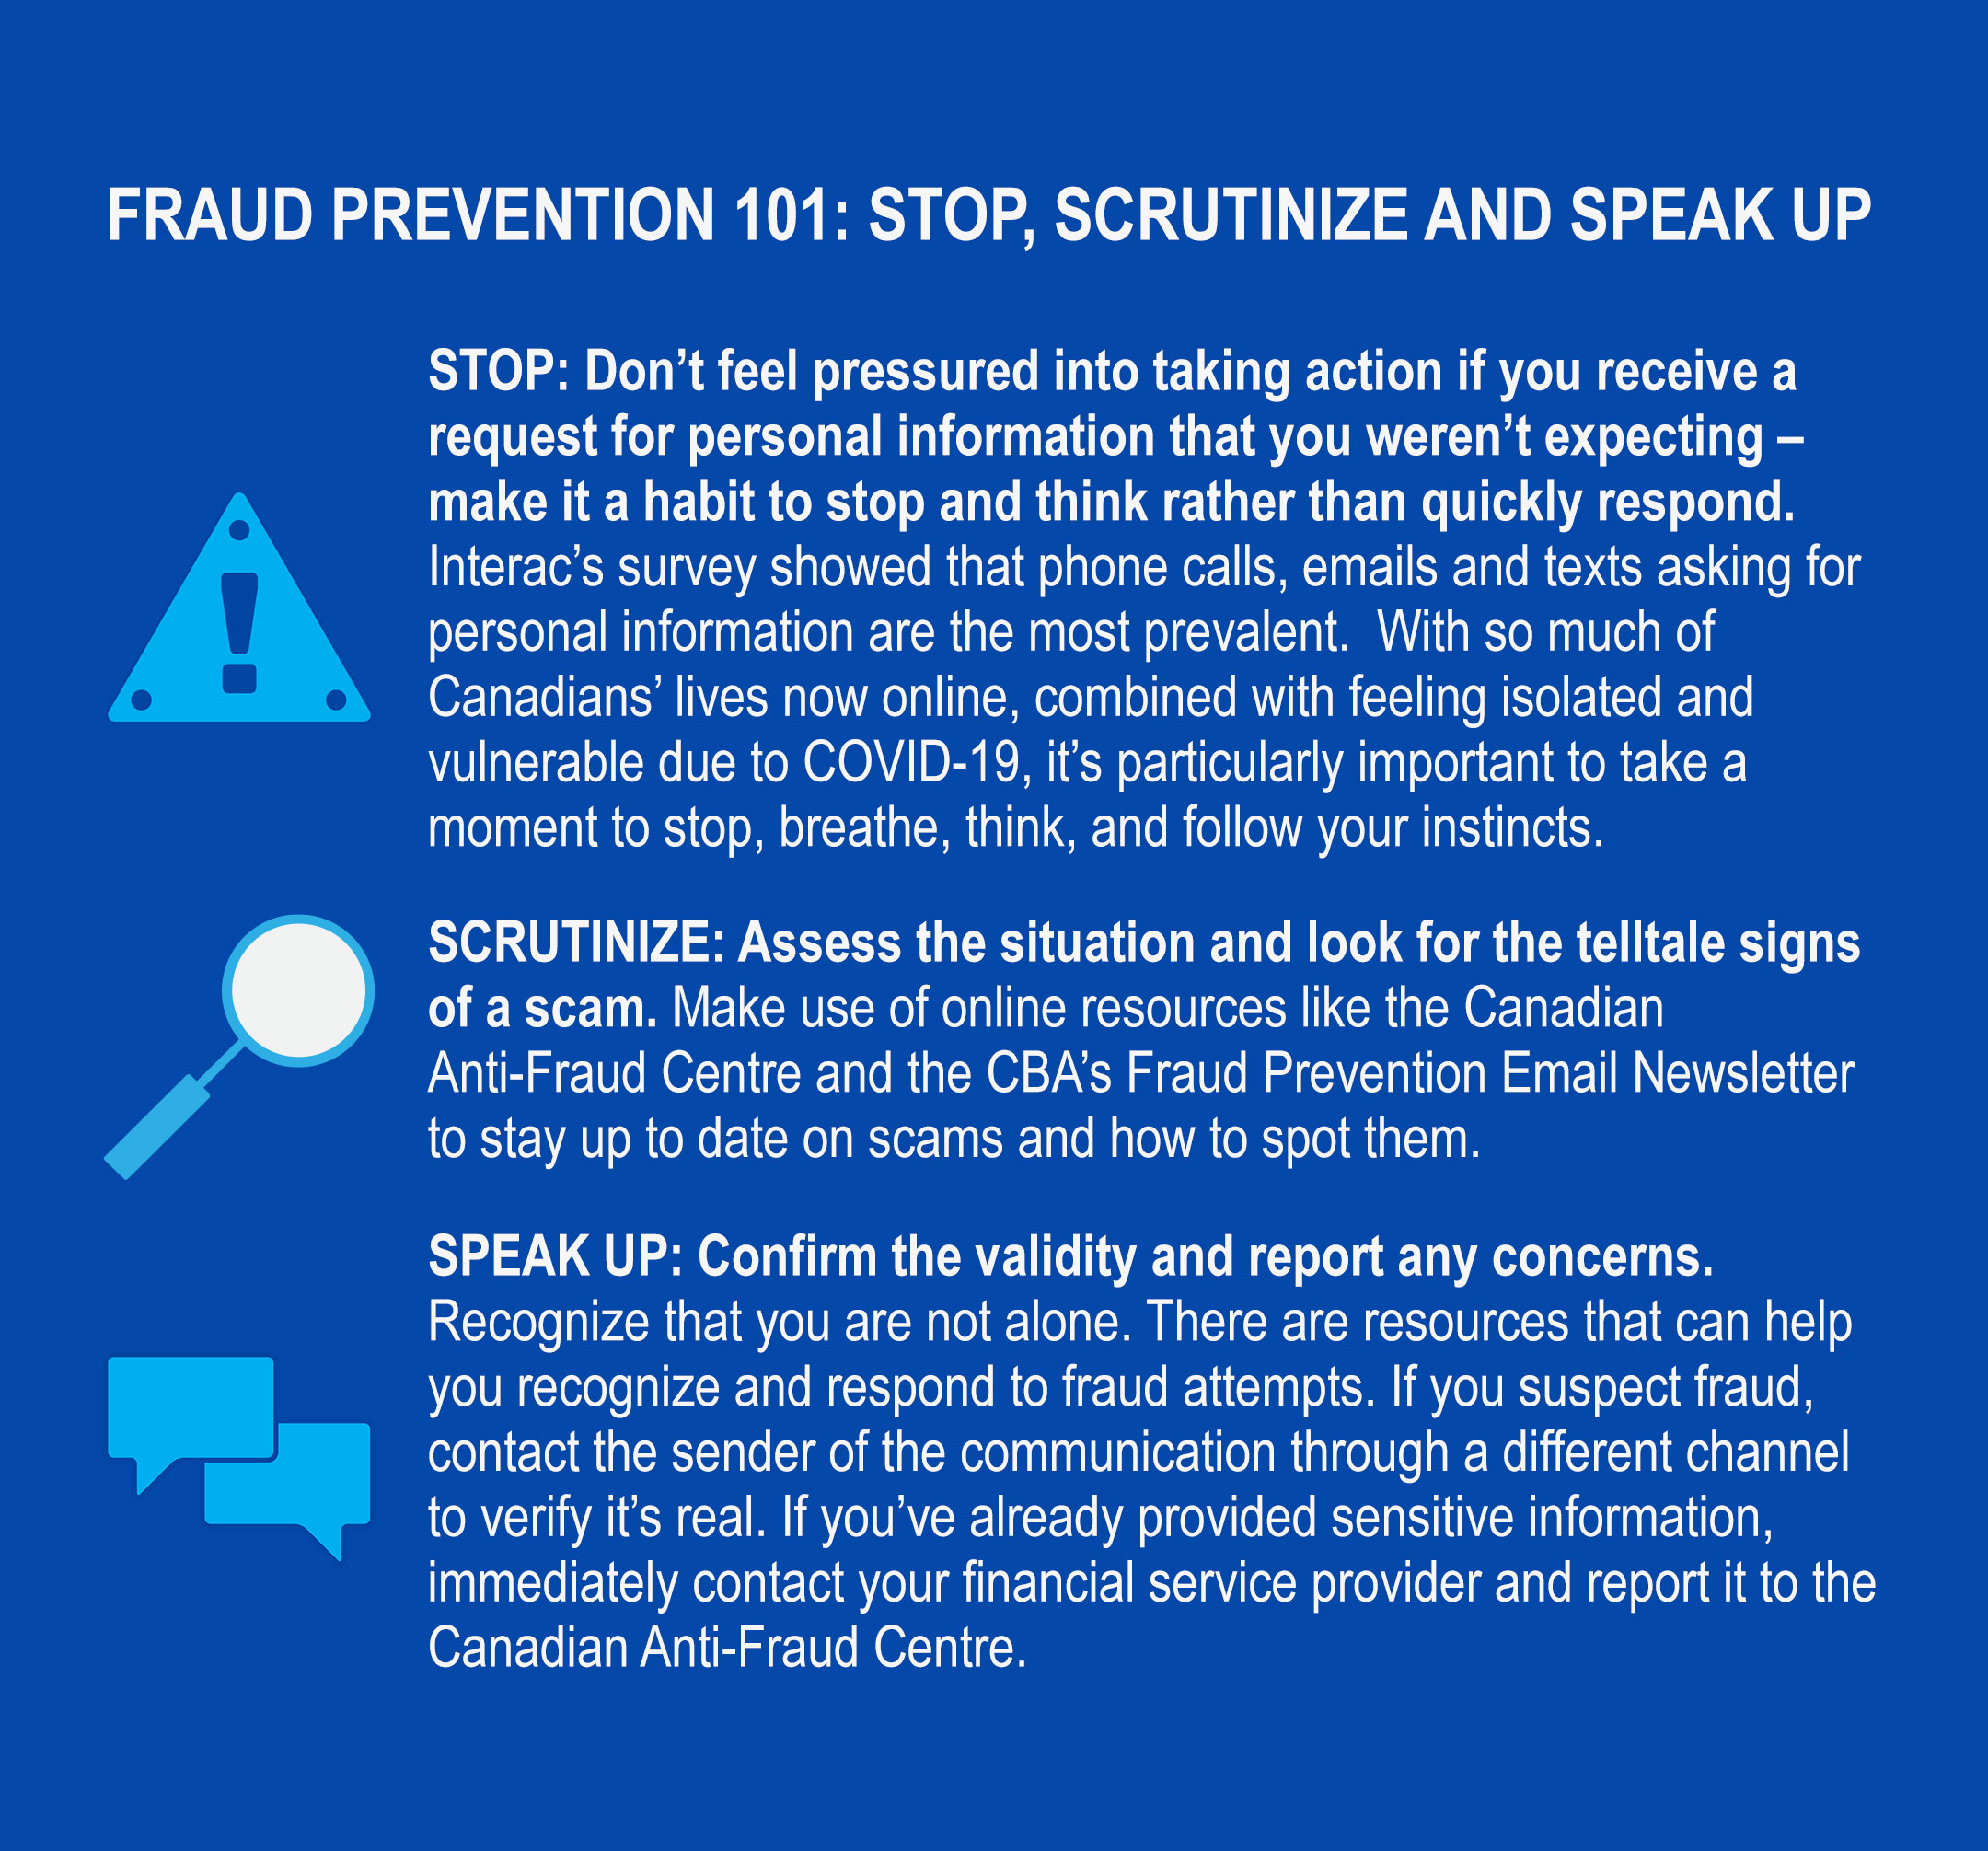 fraud prevention 101 tips... the image text is included in the next section below the image